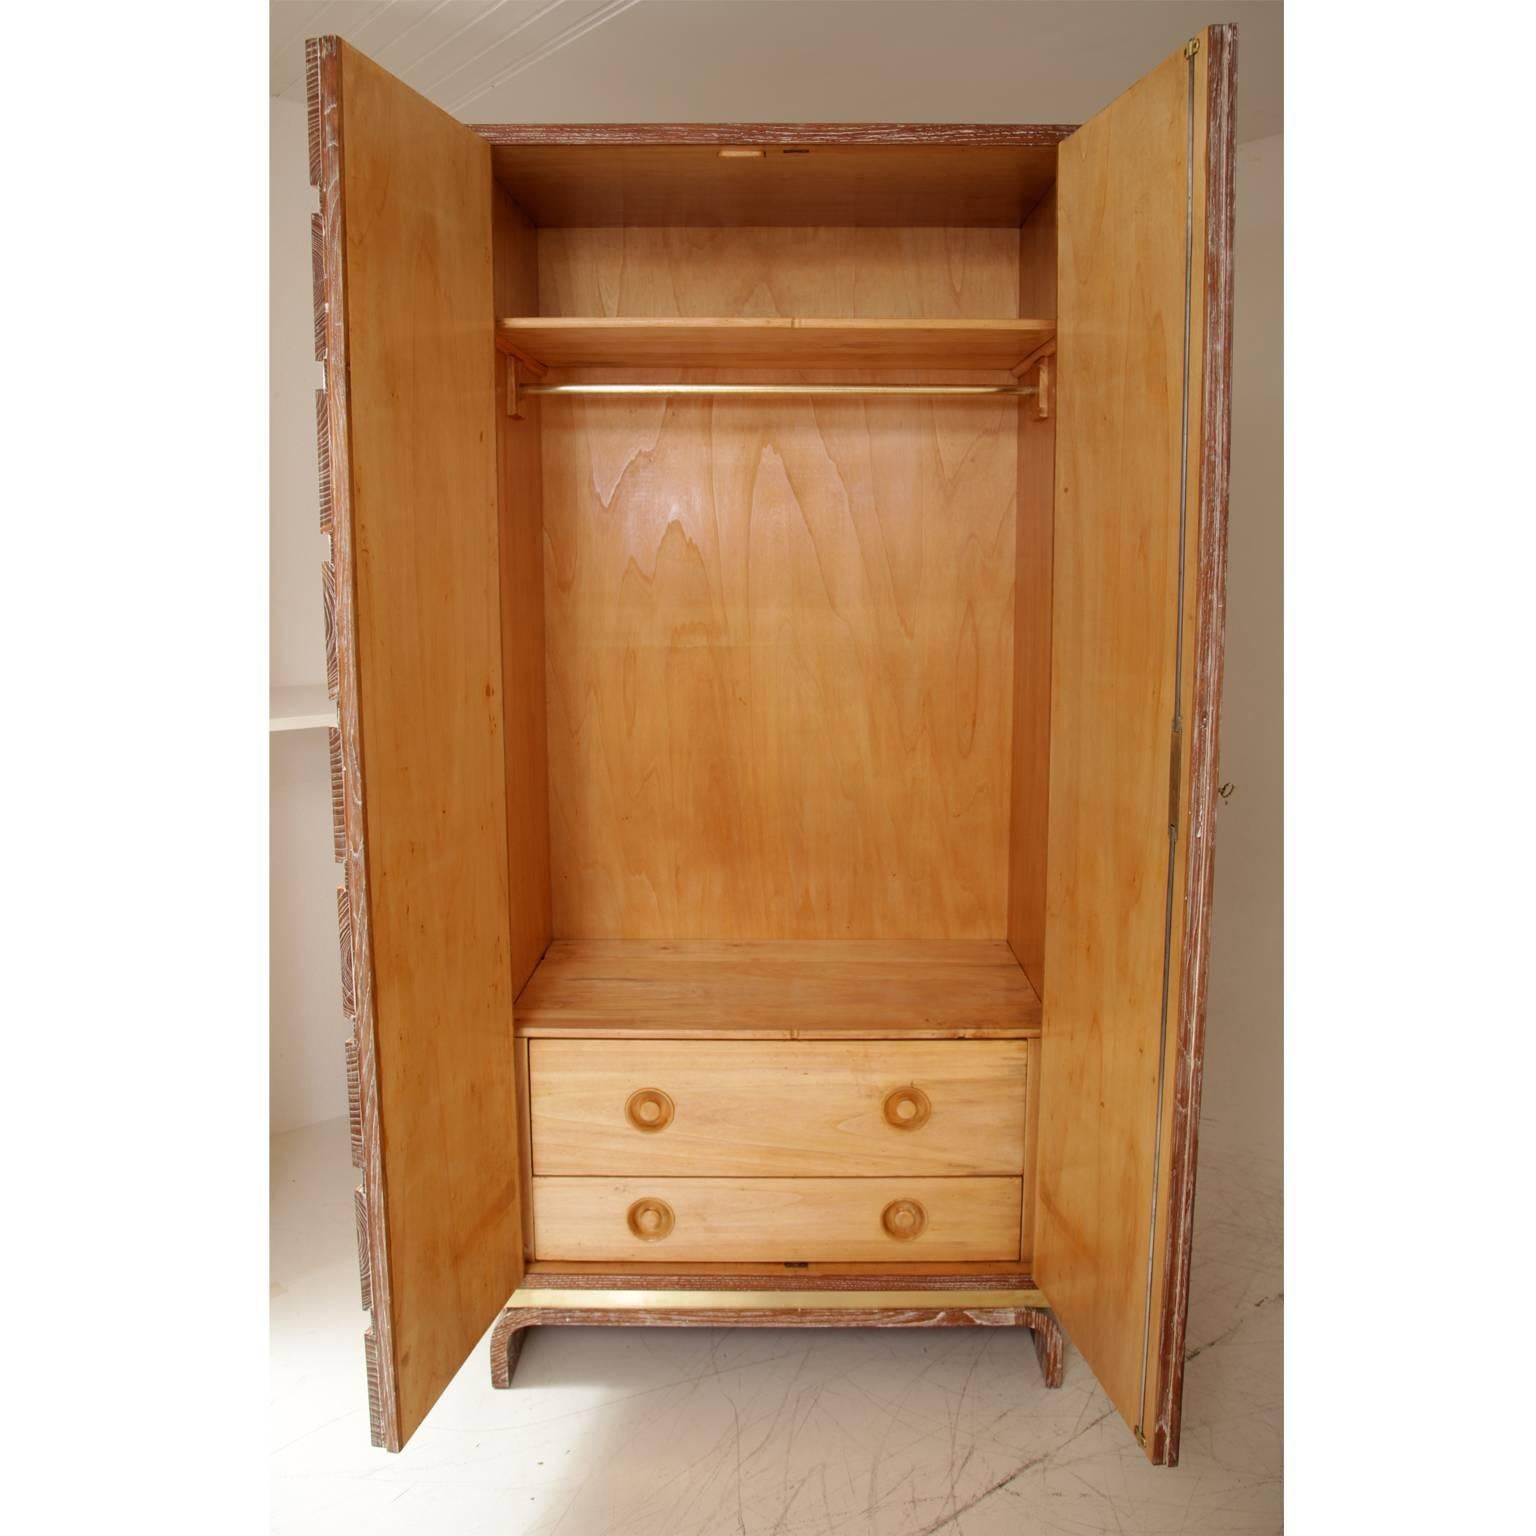 Large two-door wardrobe on a U-shaped stand with brass details. The limed finish emphasizes the beautiful oak grain. The interior consists of a clothing rack, one shelf and two large drawers.